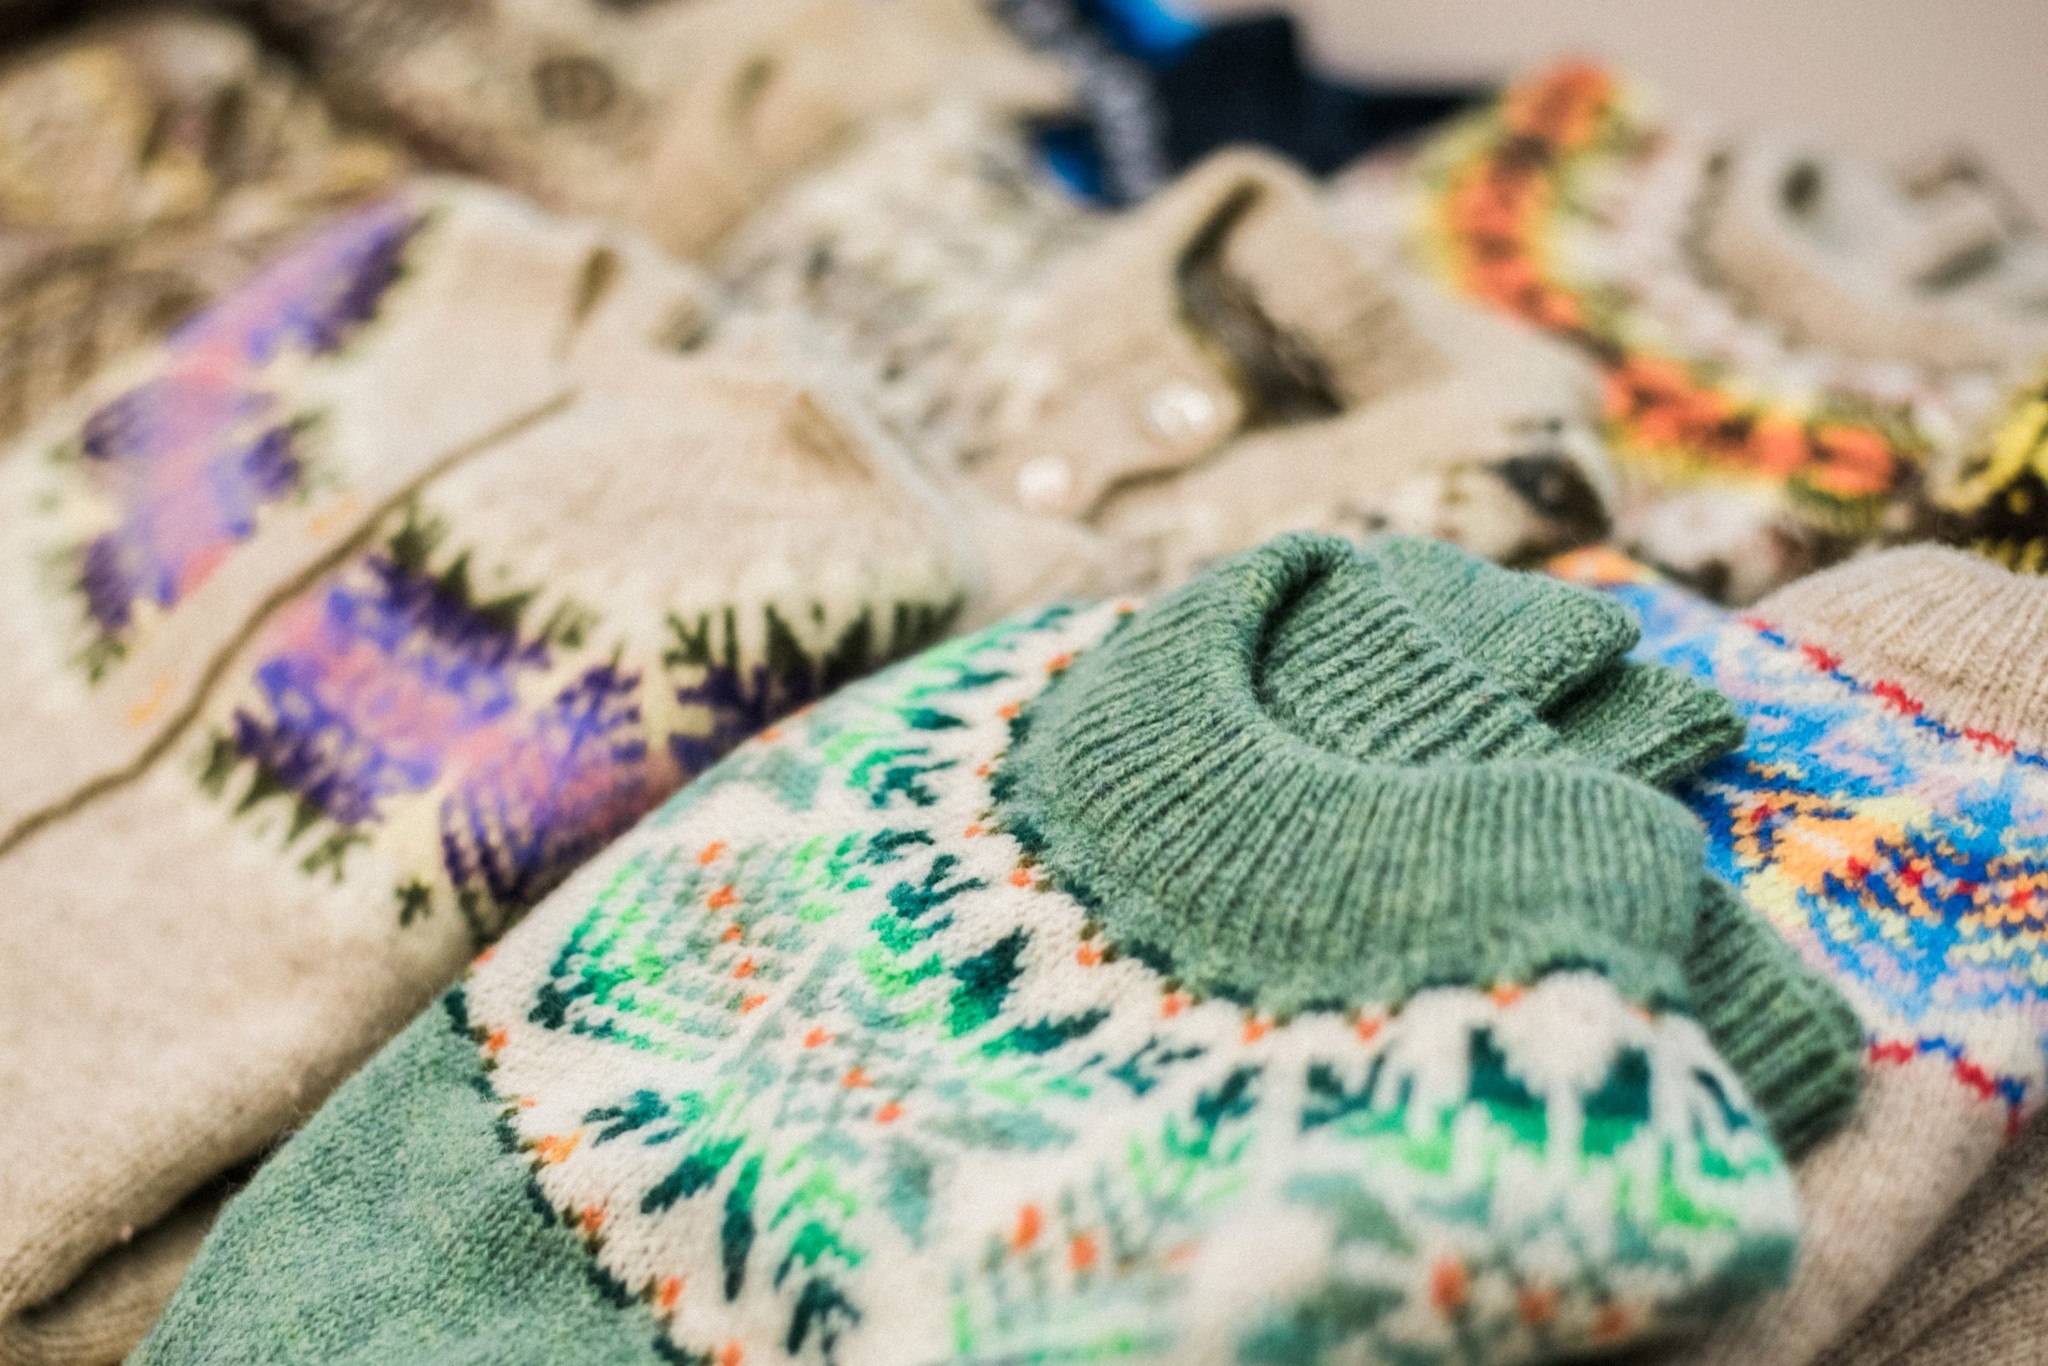 Get involved in 'Fair Isle Friday'